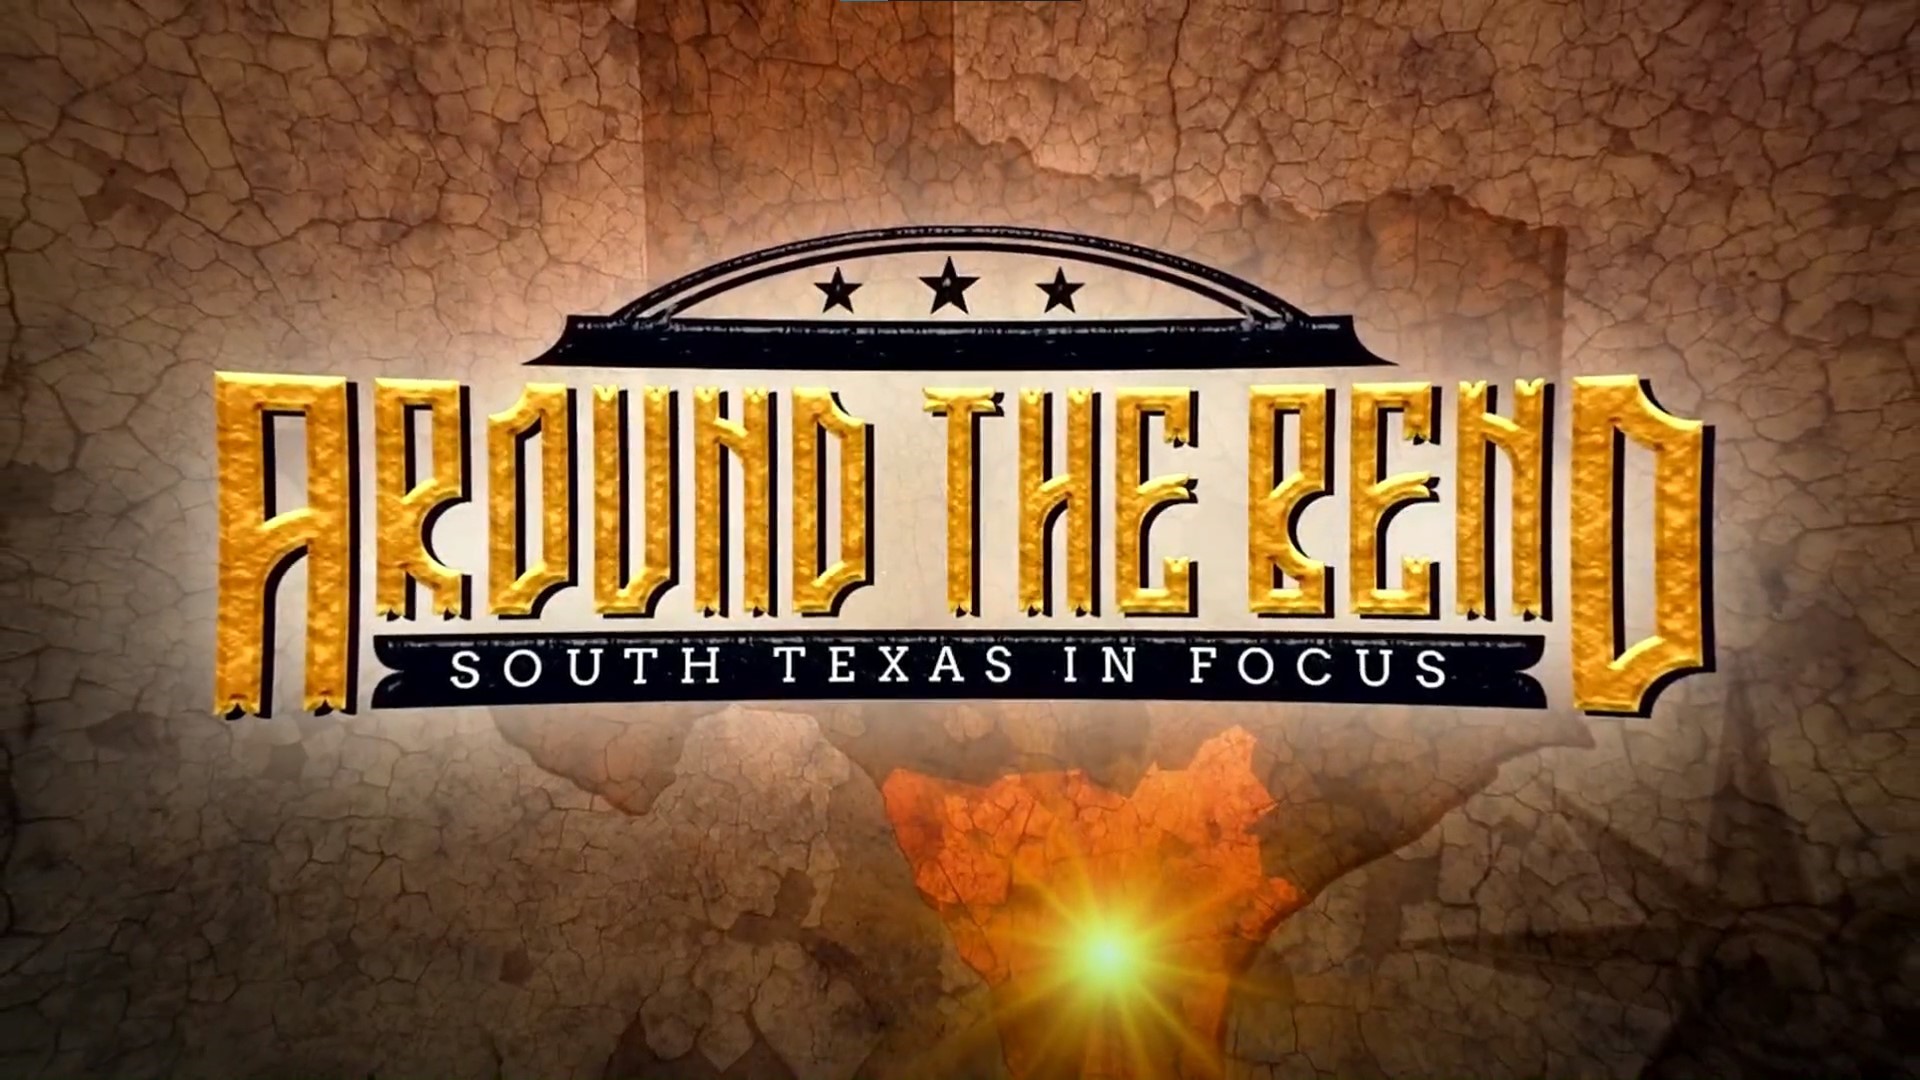 Around the Bend is a sponsored segment that features businesses around the Coastal Bend.